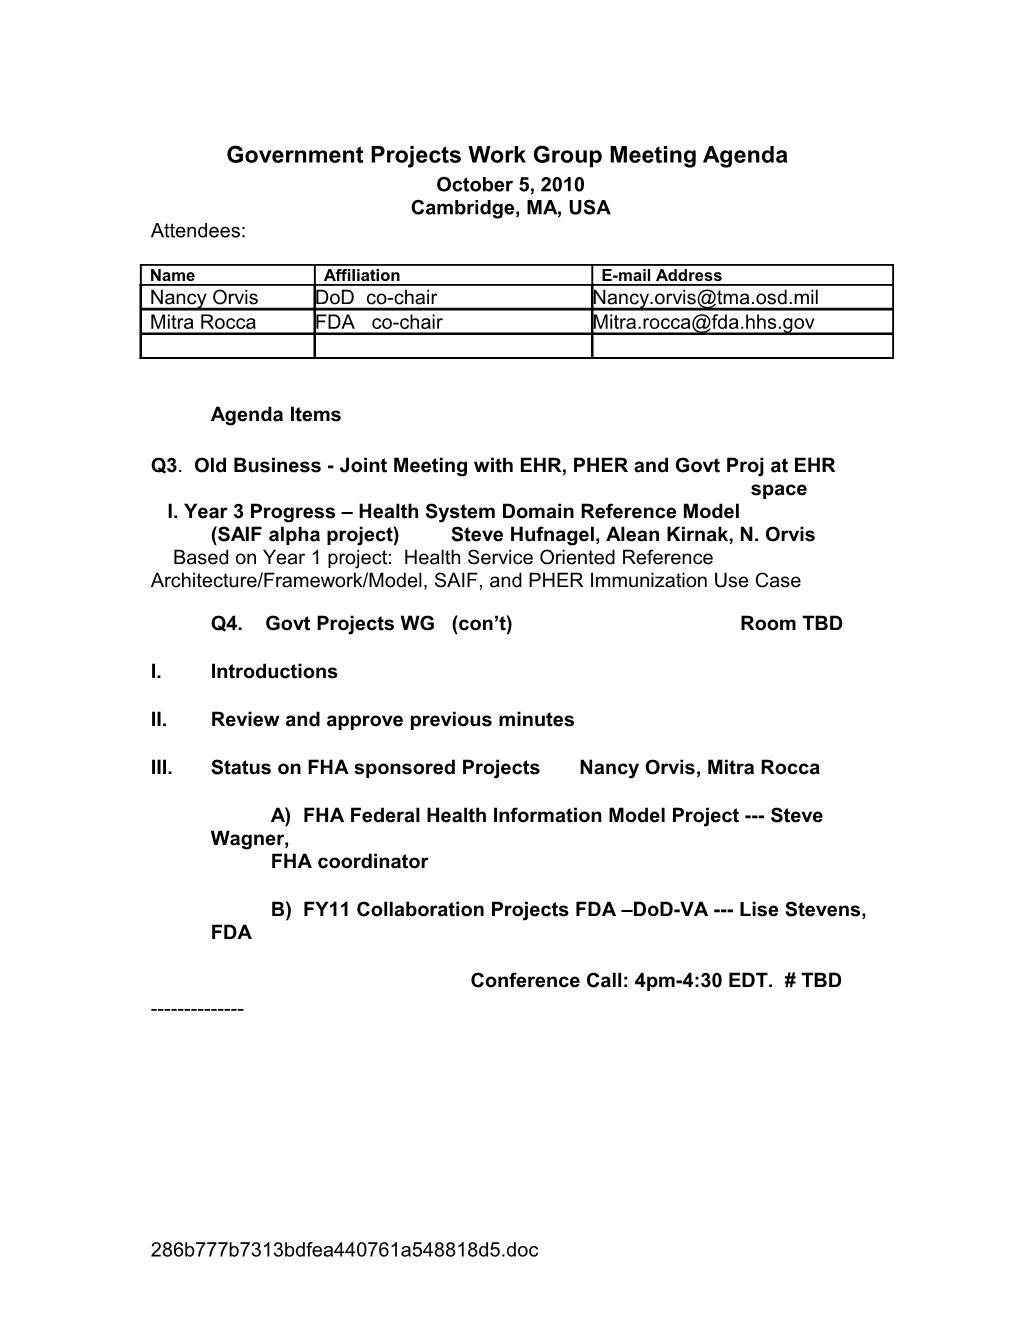 Government Projects SIG Meeting Minutes (Heading 1)